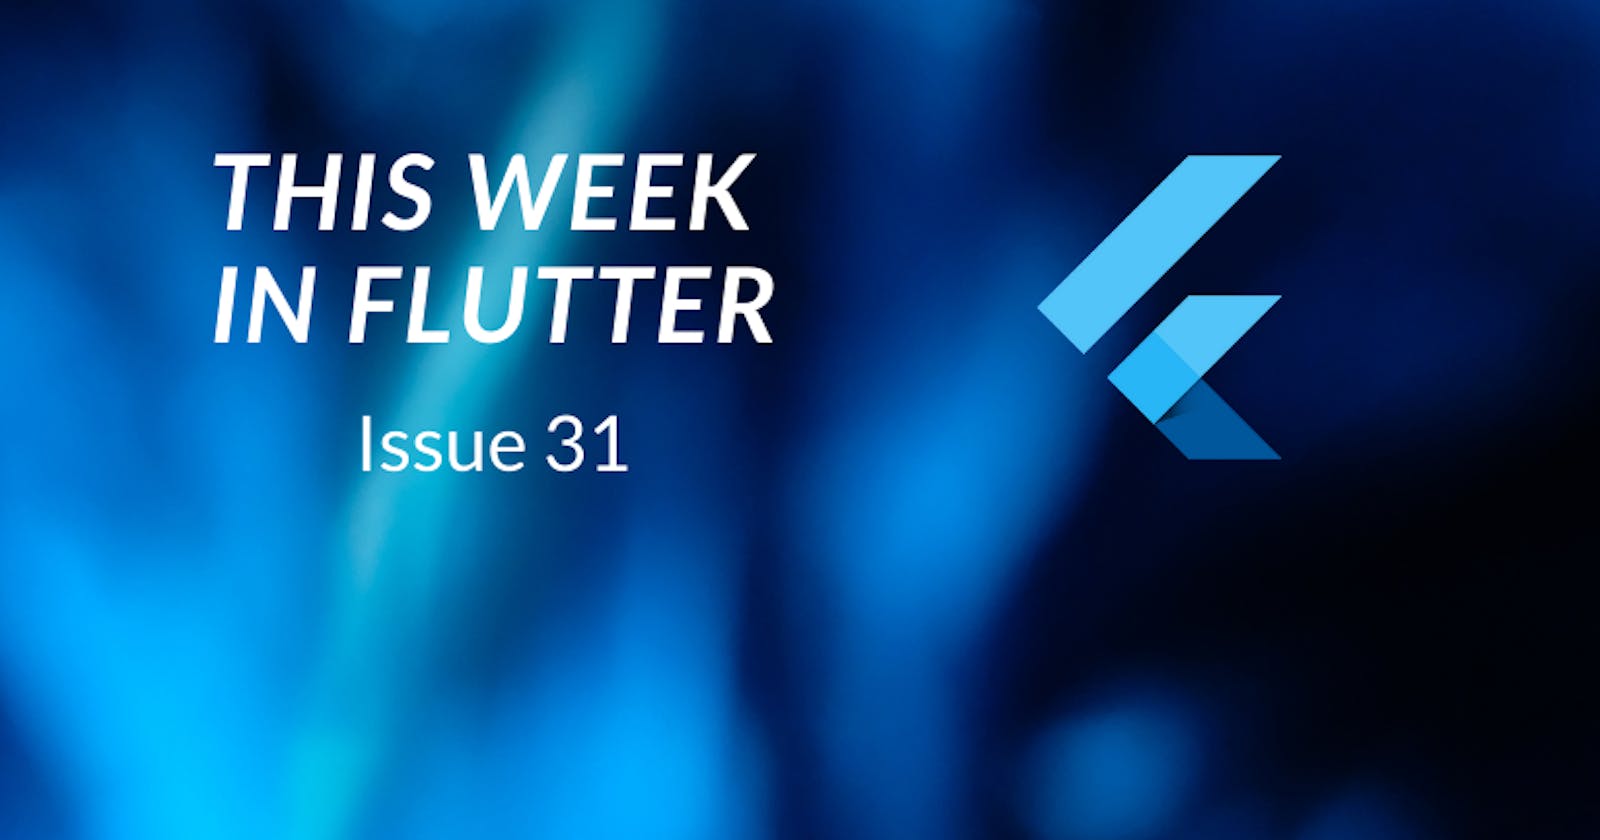 This week in Flutter #31